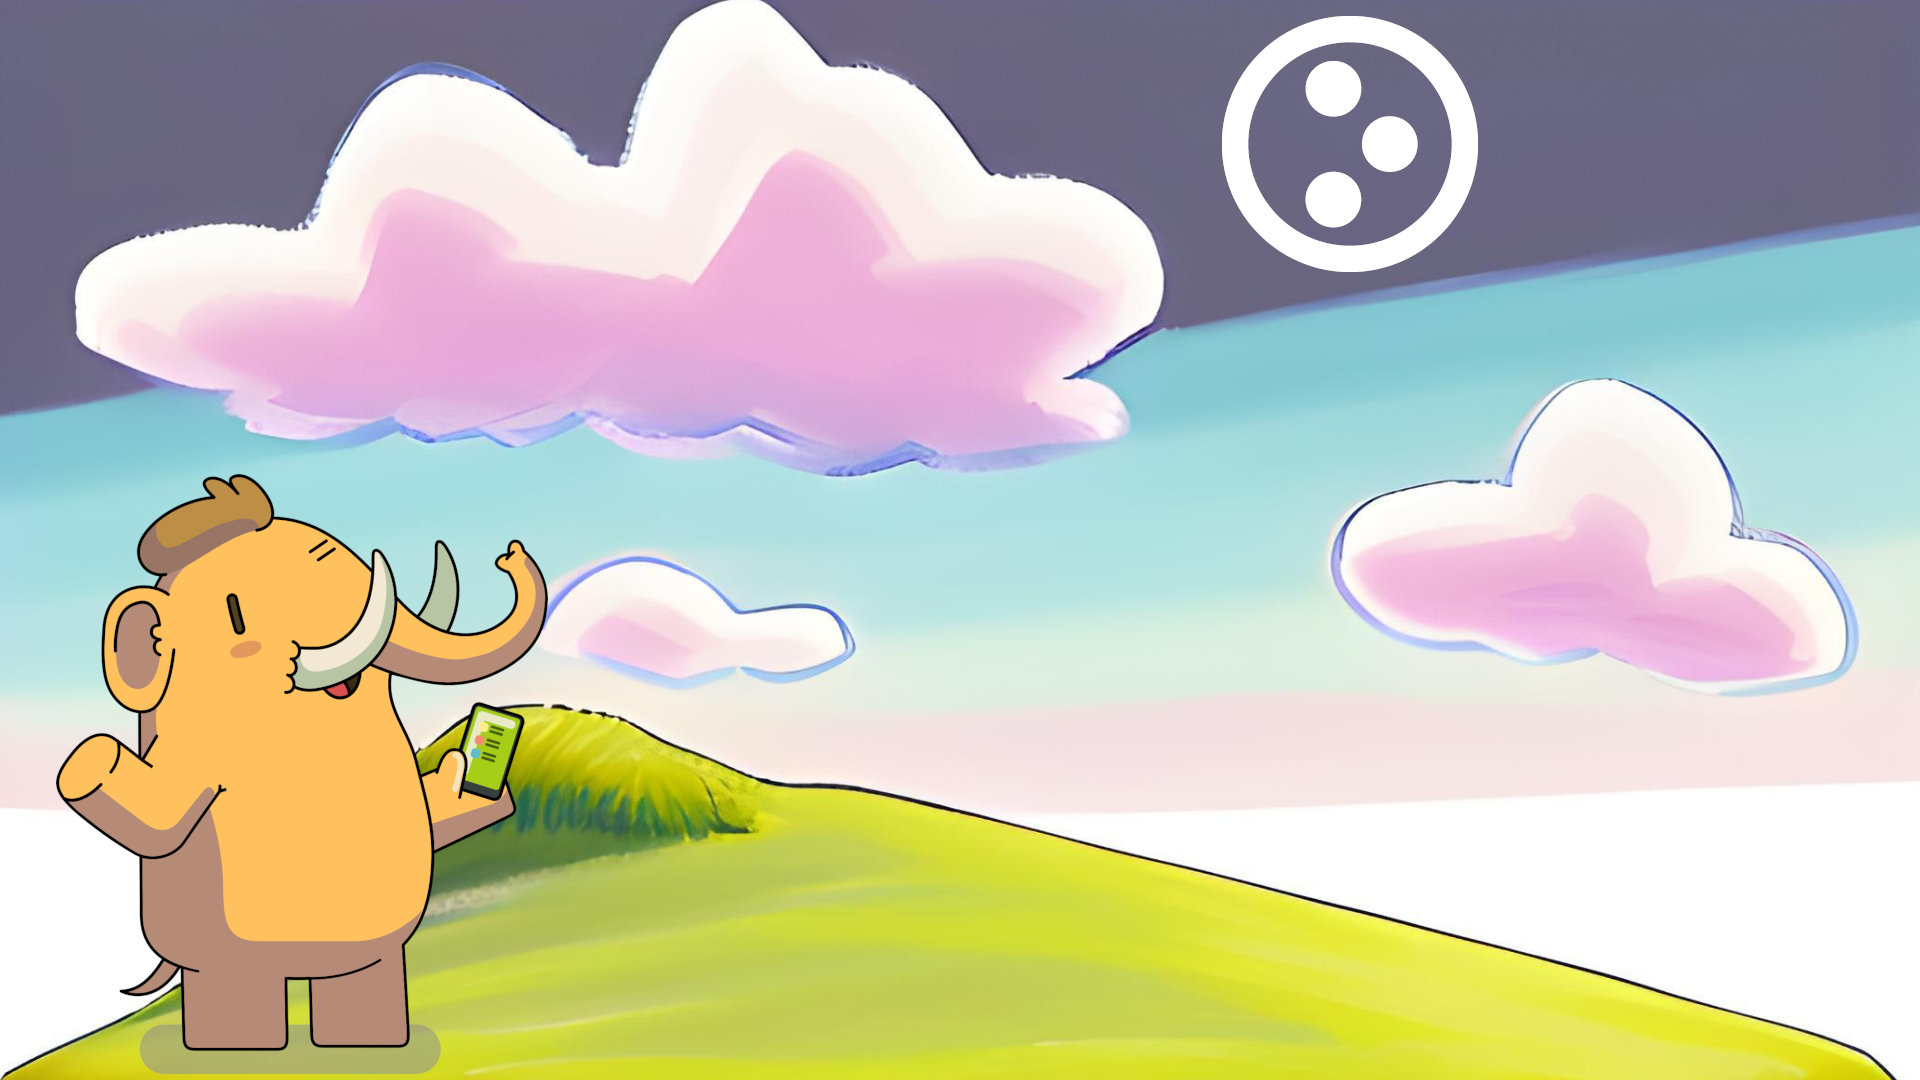 A drawing with the mascot of Mastodon on a hill, with the Plone logo, as the Sun, on the sky